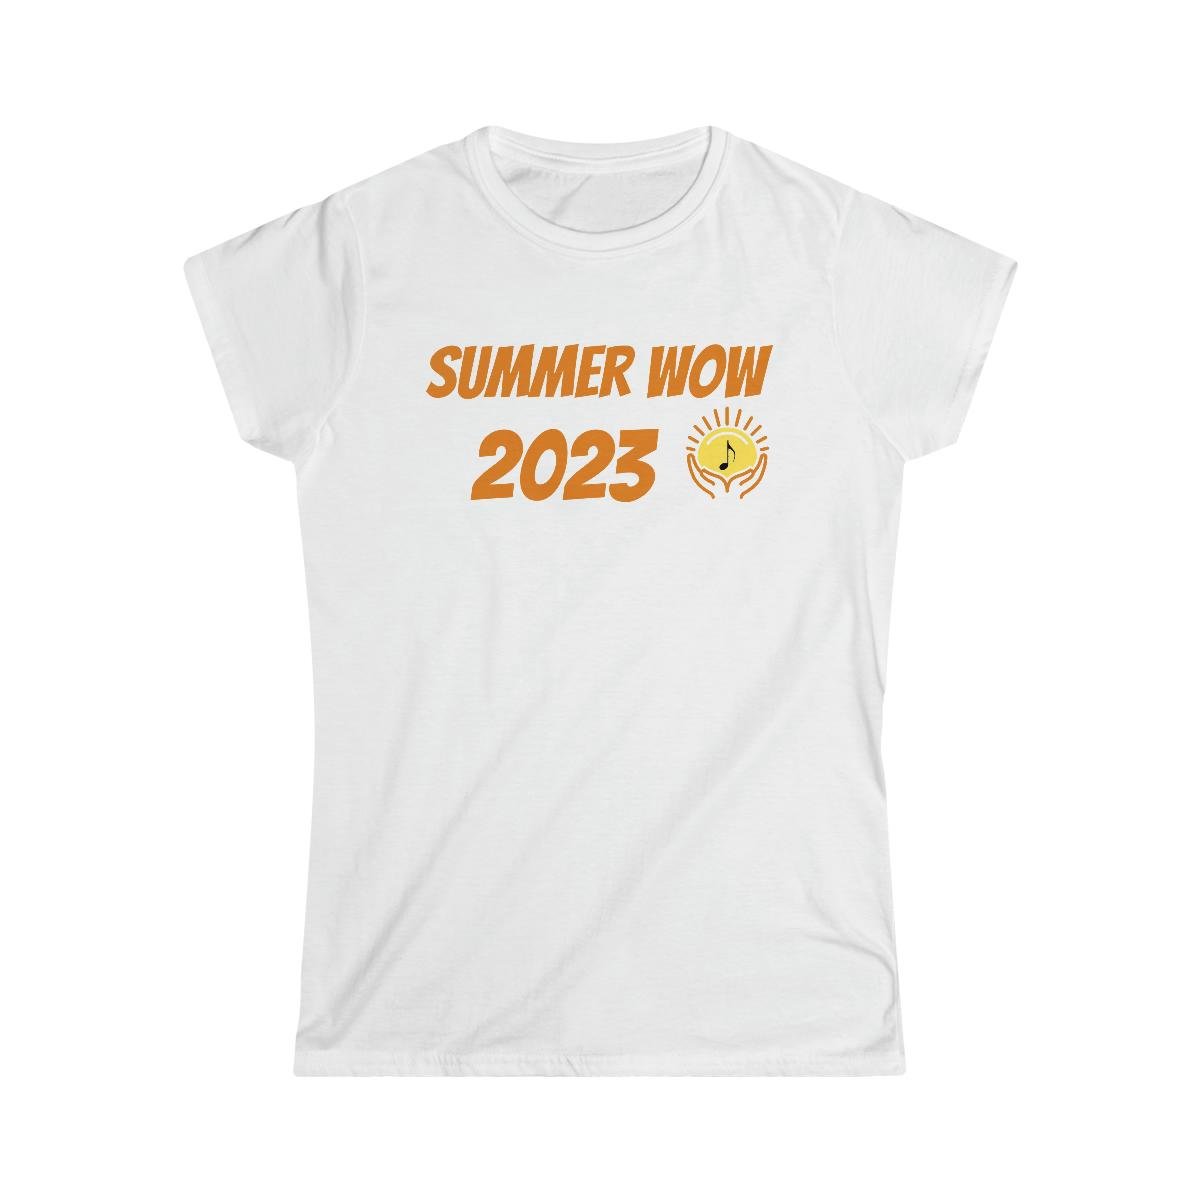 Worship On The Waterfront - Summer WOW 2023 Women's Short Sleeve Tshirt